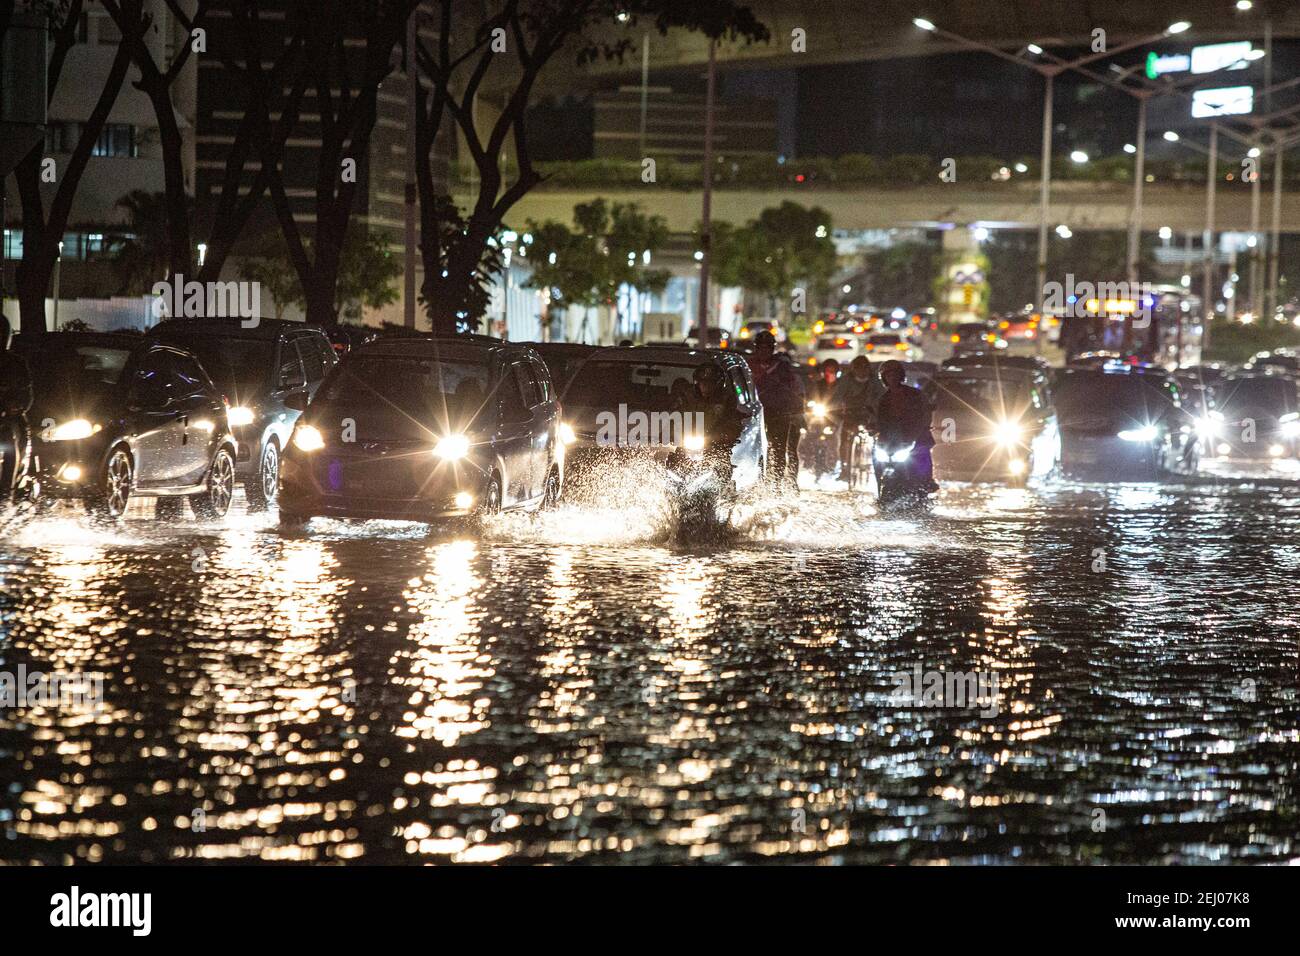 Jakarta, Jakarta, Indonesia. 20th Feb, 2021. A view of traffic jam during a flood following heavy rains at business district in Jakarta, Indonesia on February 20, 2021. At least 21 areas in the Indonesian capital were hit by floods Saturday following heavy rains, during which thousands of homes were also damaged, according to the National Board for Disaster Management Credit: Afriadi Hikmal/ZUMA Wire/Alamy Live News Stock Photo